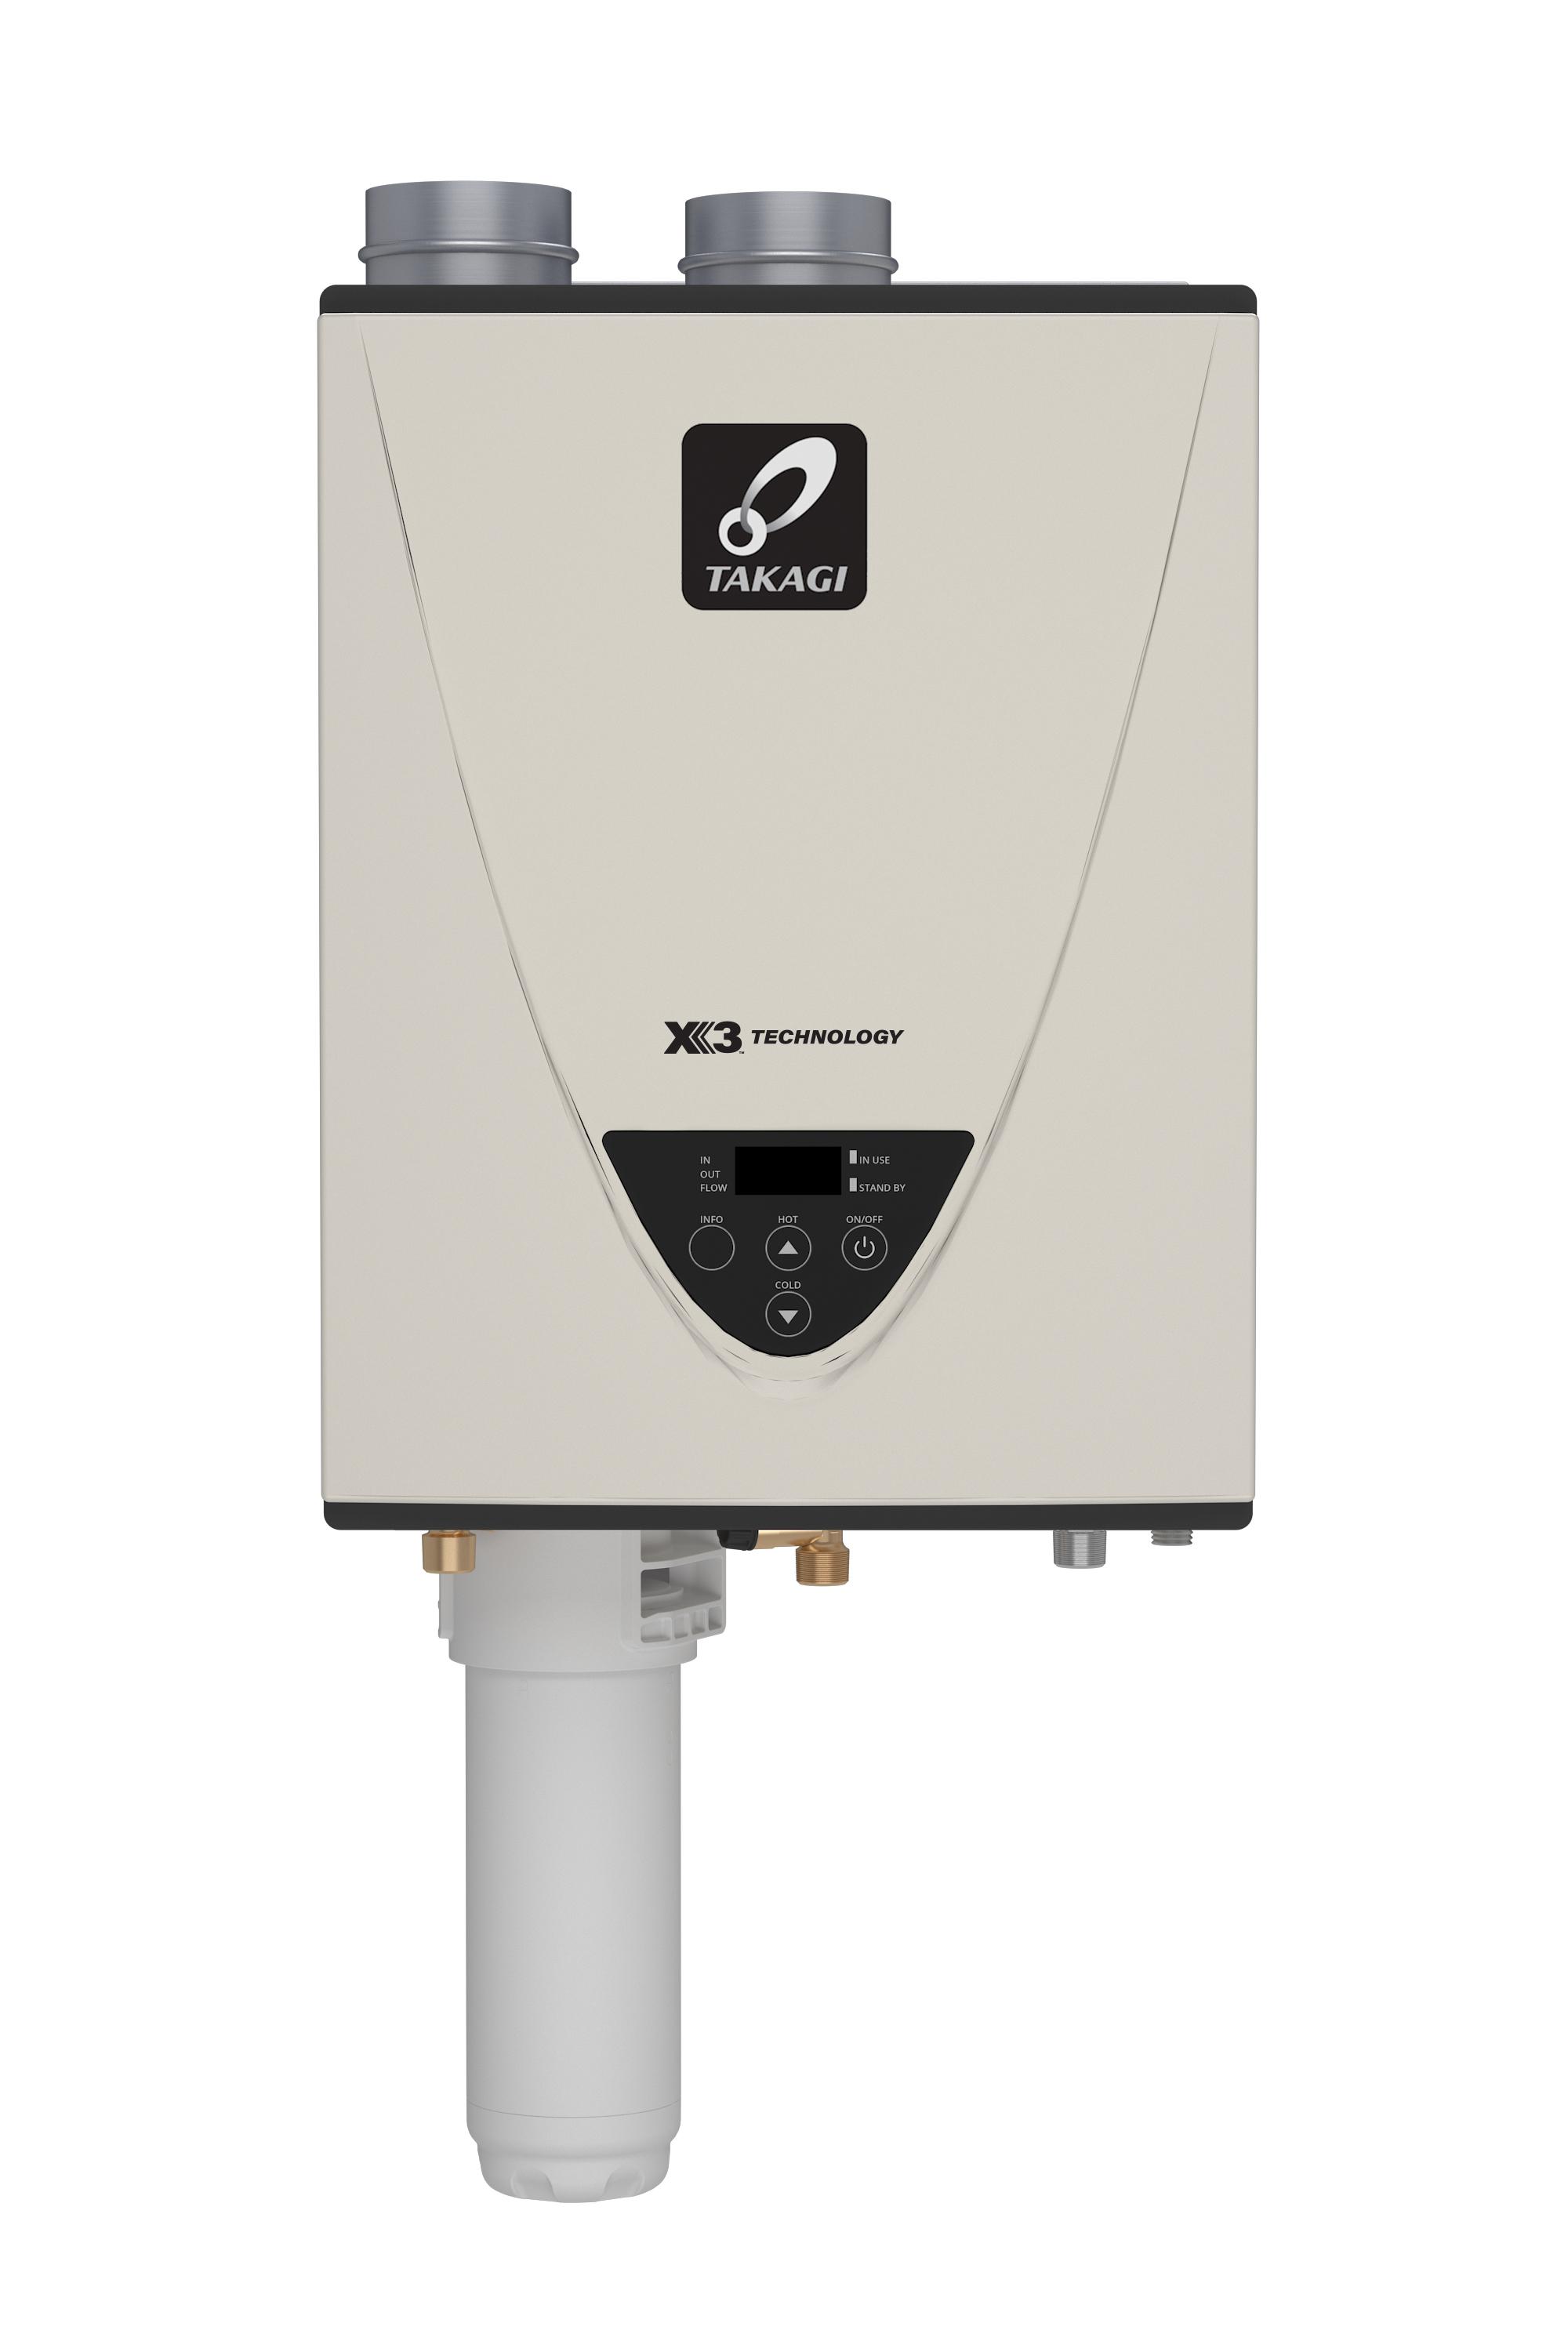 Takagi TK-540X3-NIH Tankless Water Heater, Natural Gas Fuel, Indoor/Outdoor: Outdoor, Condensing, 10.00 Flow Rate, Direct Vent, 3, 4 in Vent, Dual